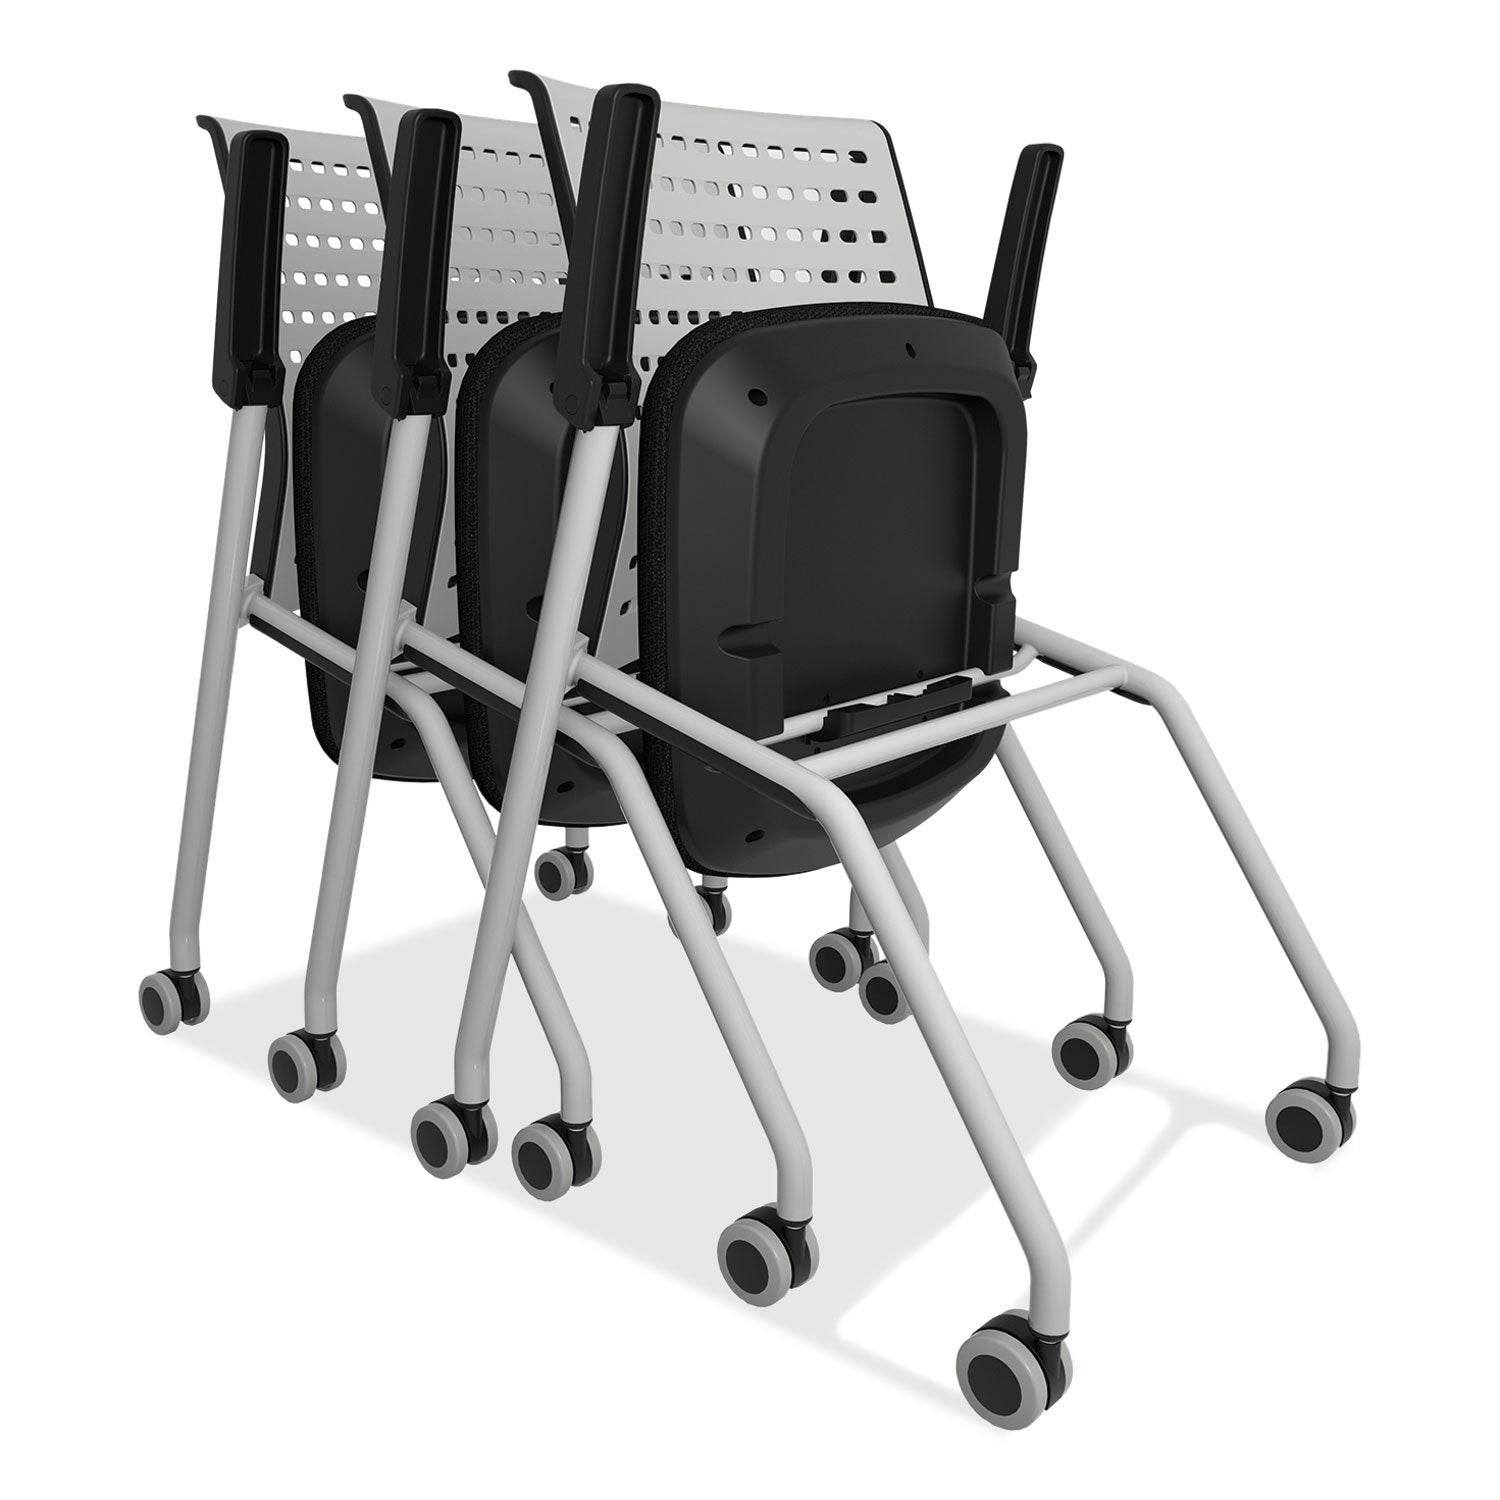 thesis-training-chair-w-static-back-and-arms-max-250-lb-18-high-black-seatgray-back-base2-ctships-in-1-3-business-days_safkts1sgblk - 2